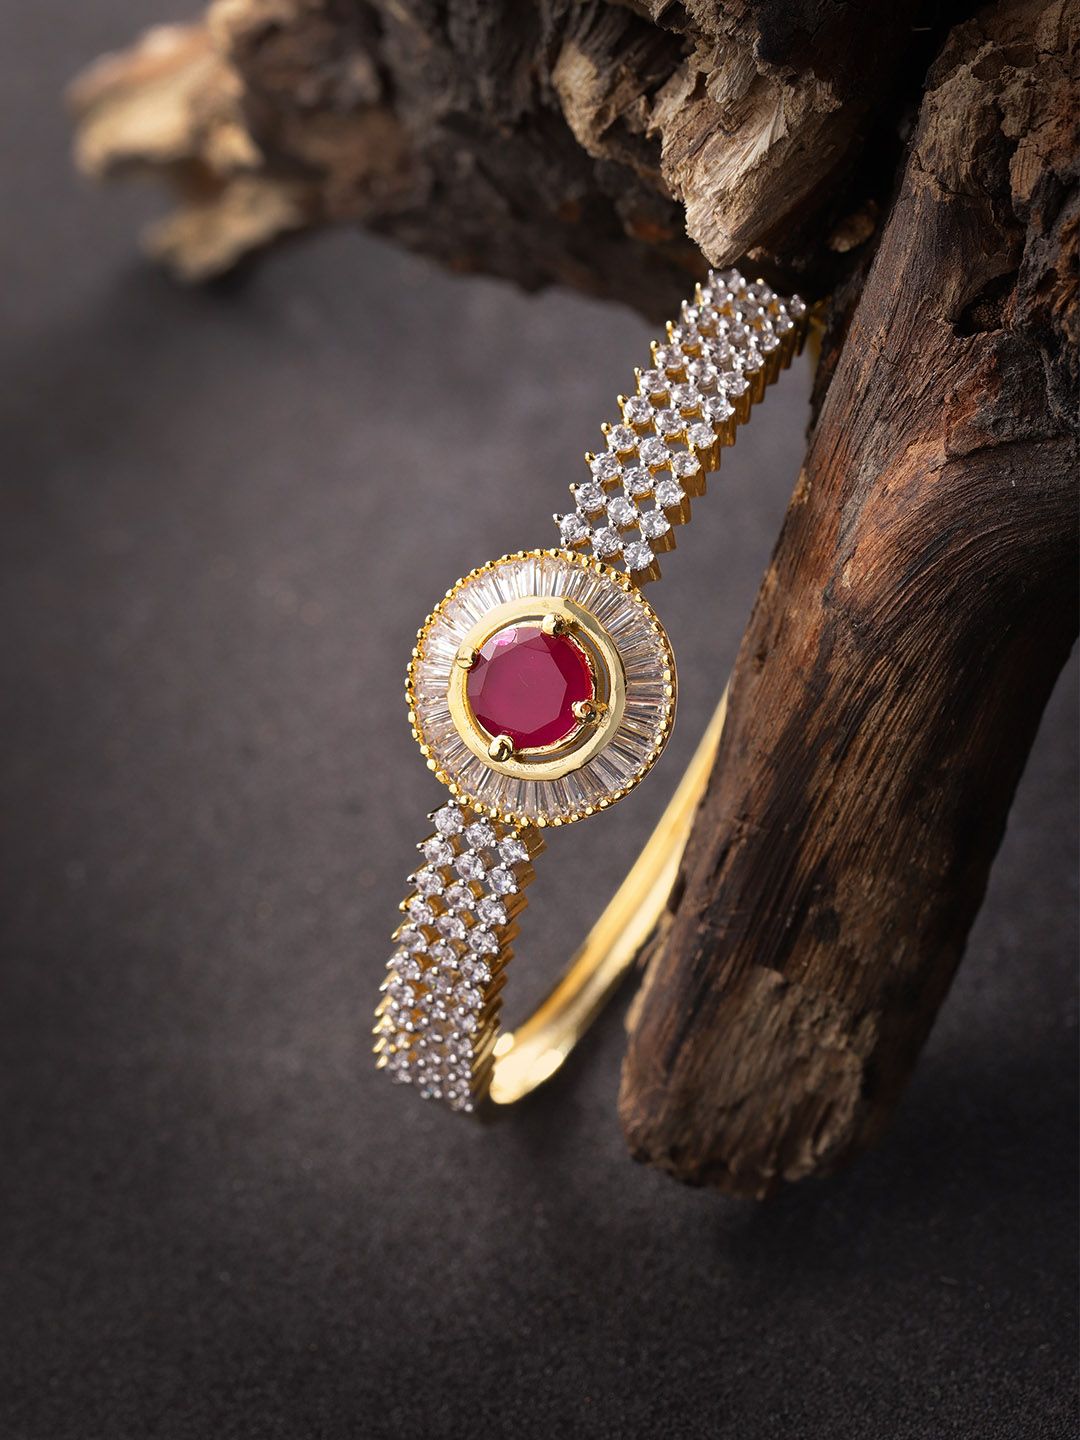 Priyaasi Gold-Plated & Magenta Handcrafted American Diamond Studded Bangle-Style Bracelet Price in India